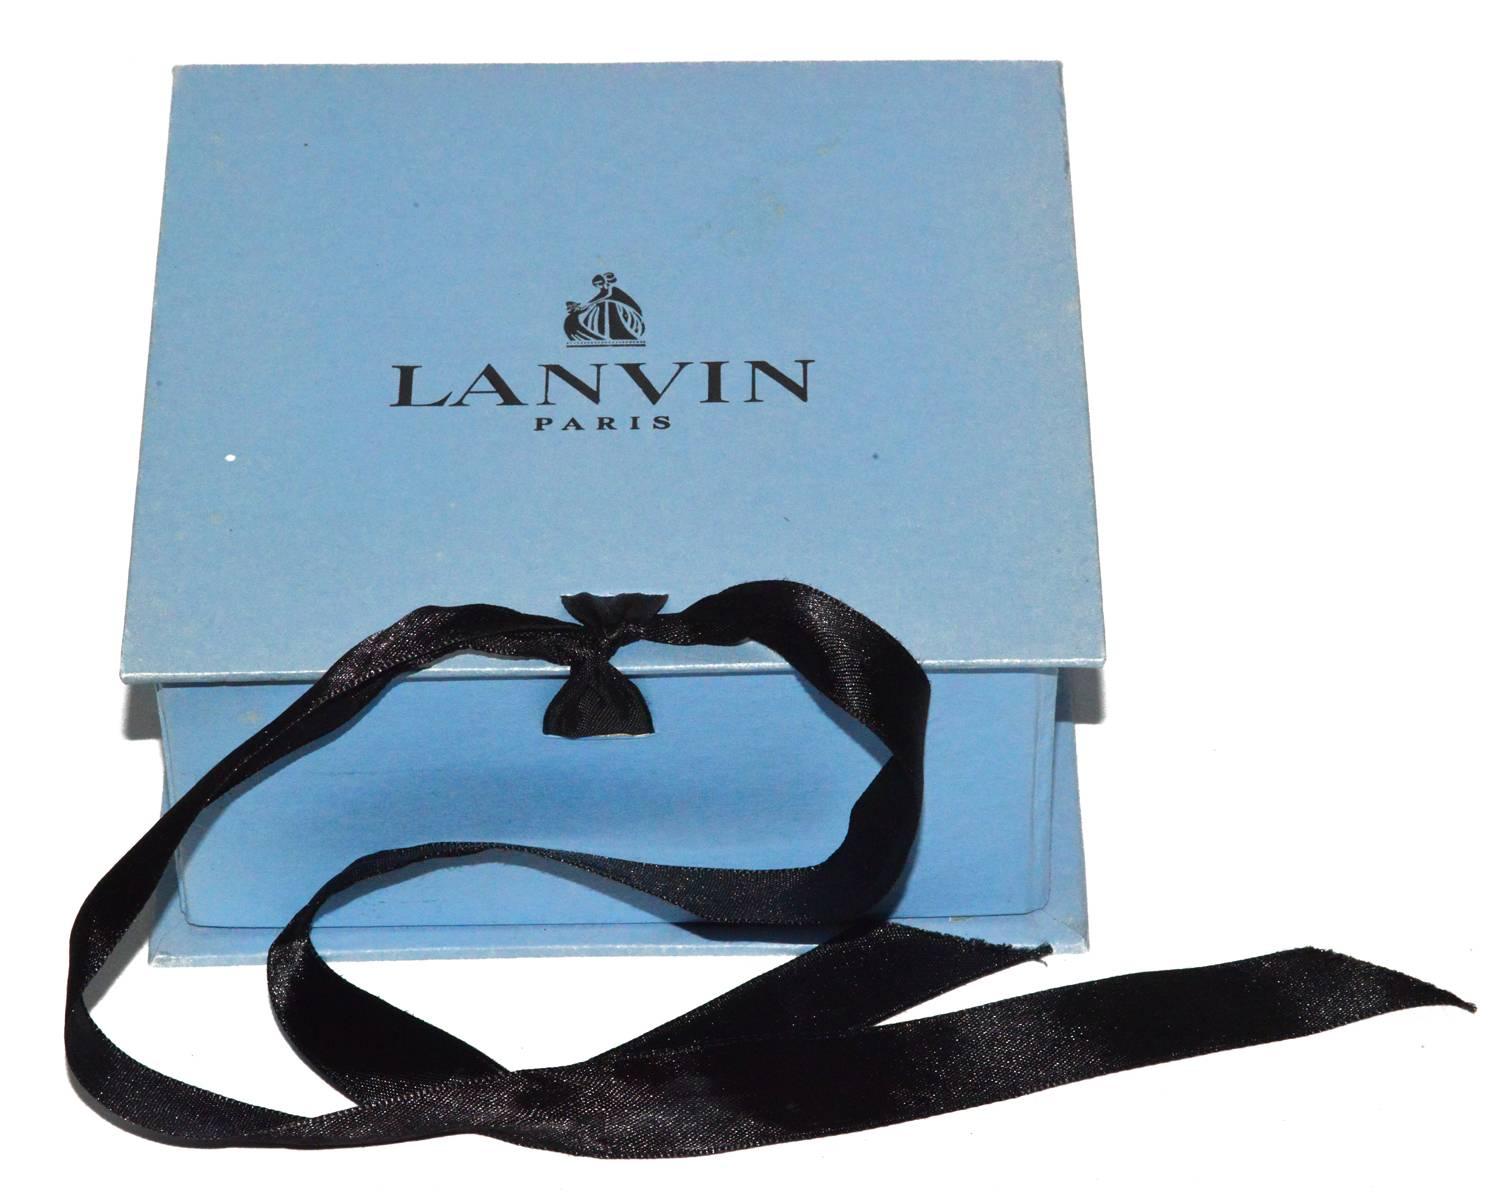 Gorgeous large Lanvin enamel hand brooch in pristine condition, with box from Gem de la Gem.